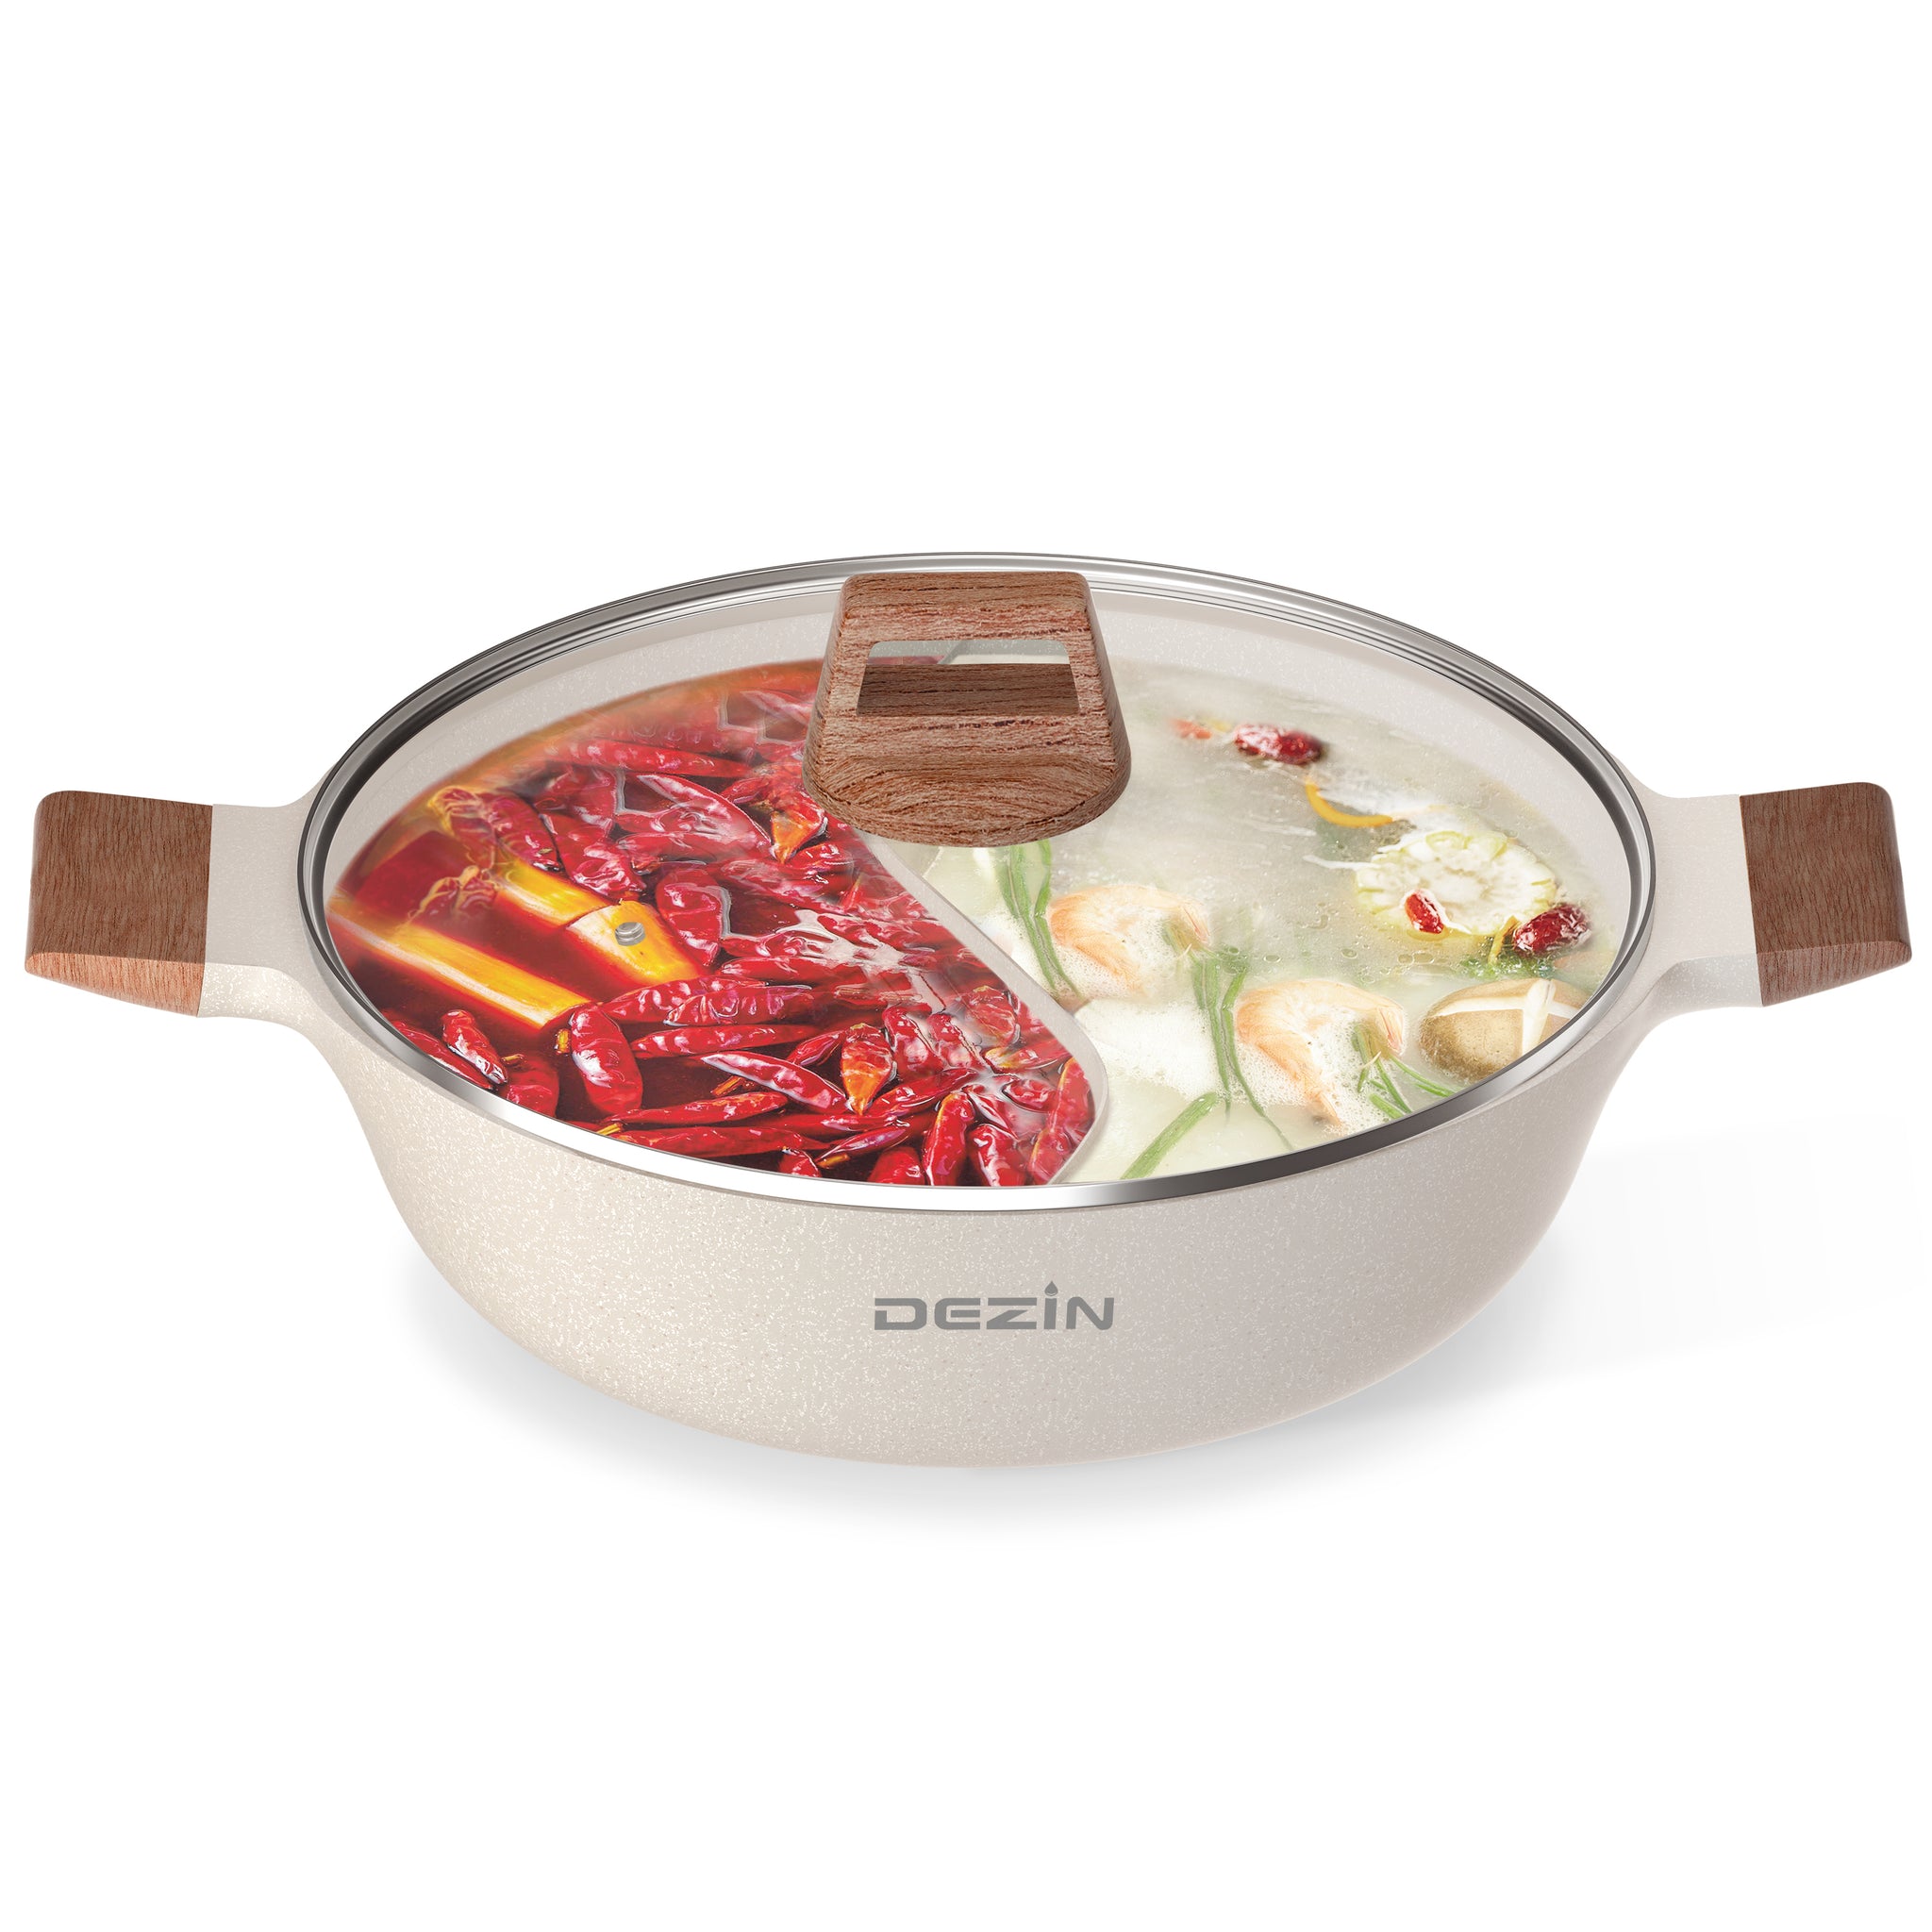 The Rock by Starfrit Dual-Sided Electric Hot Pot